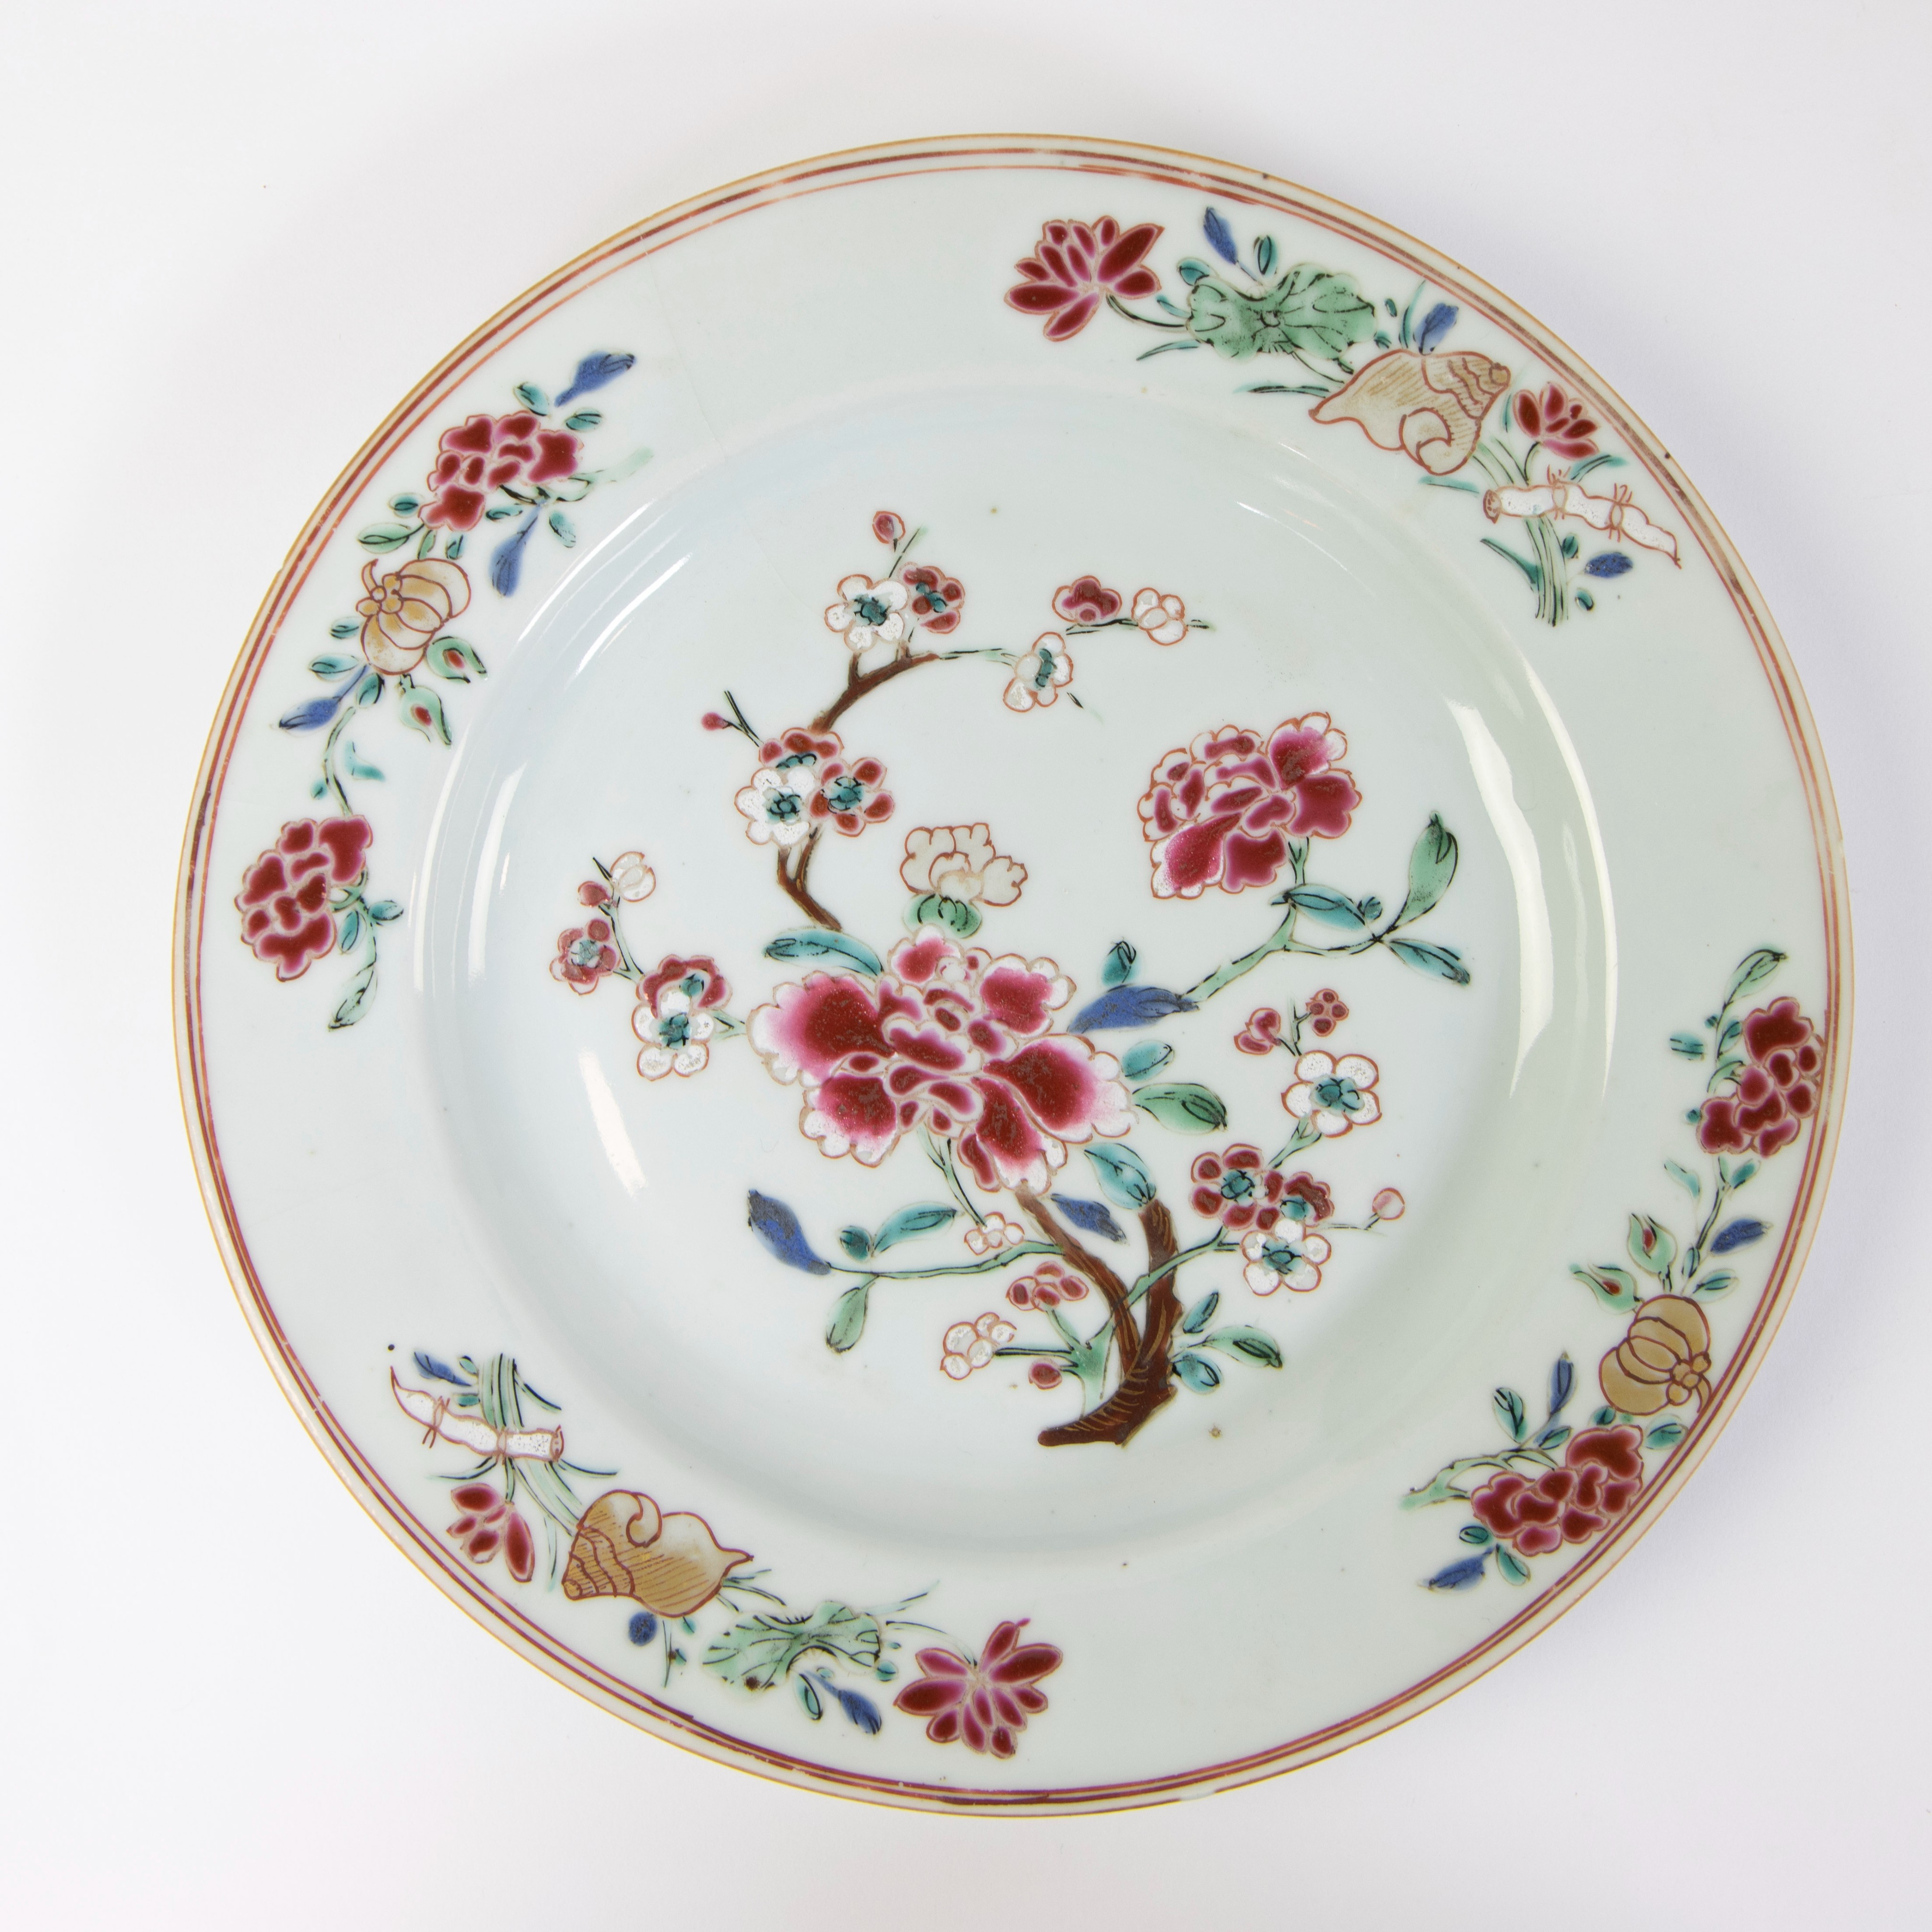 Lot of 5 Chinese famille rose plates, 18th century - Image 2 of 18